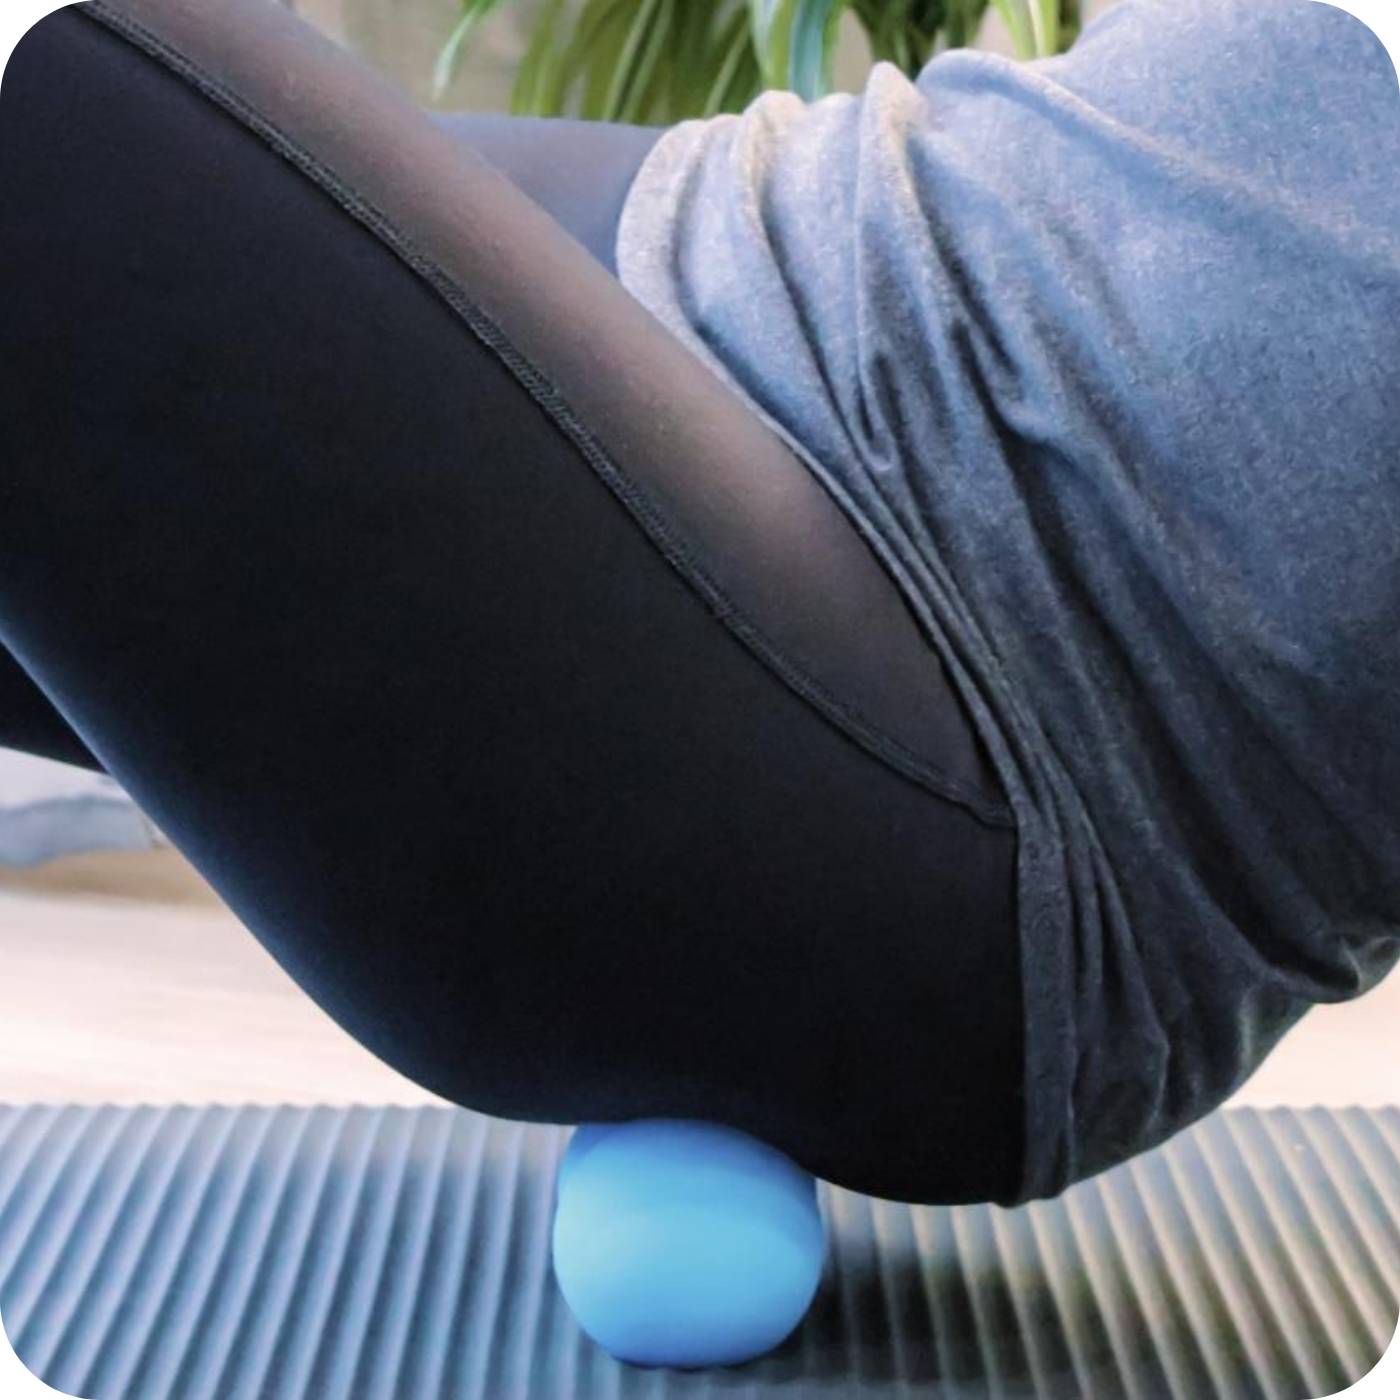 woman massaging her glutes with her 3dactive peanut ball massager